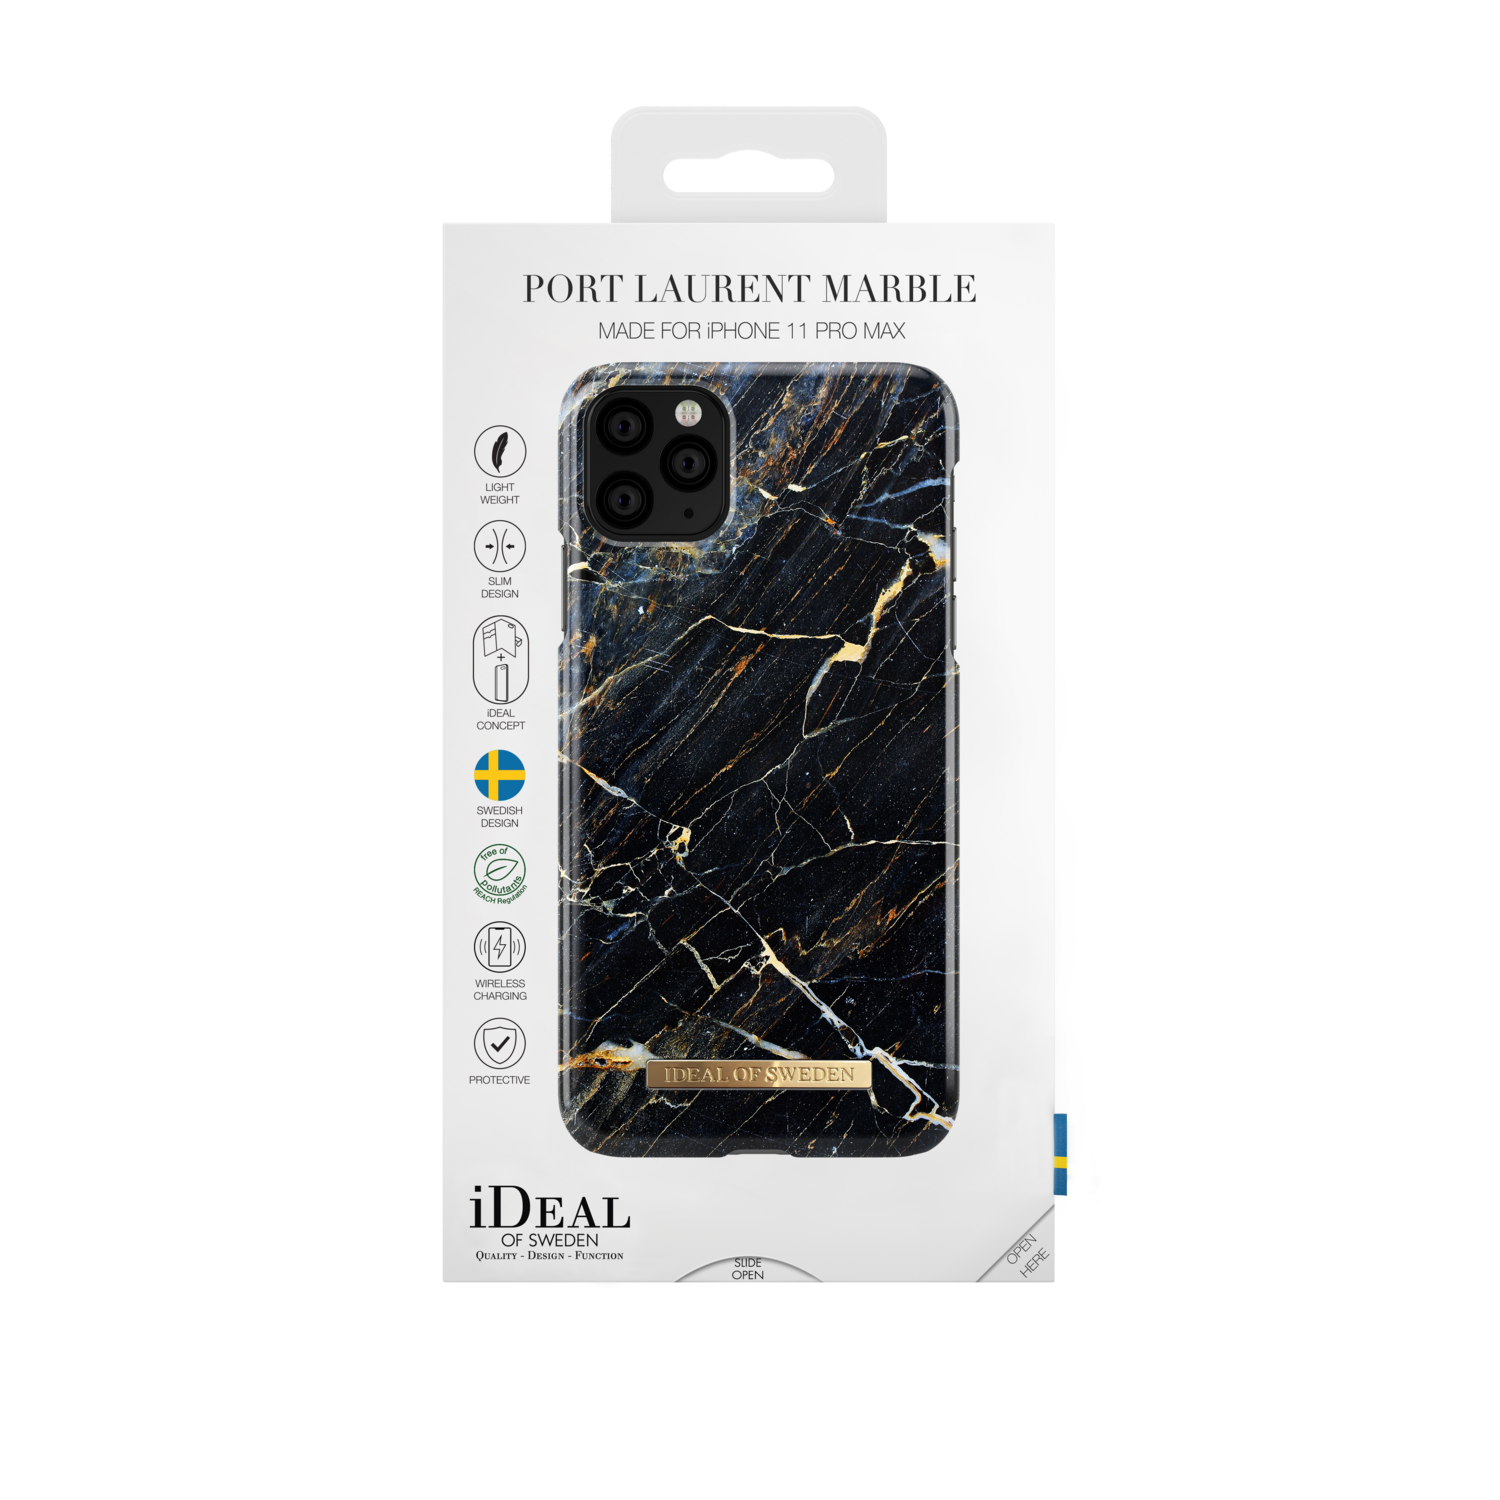 iDeal Of Sweden iPhone 11 Pro Max 6.5" Fashion Case 2019, Port Laurent Marble